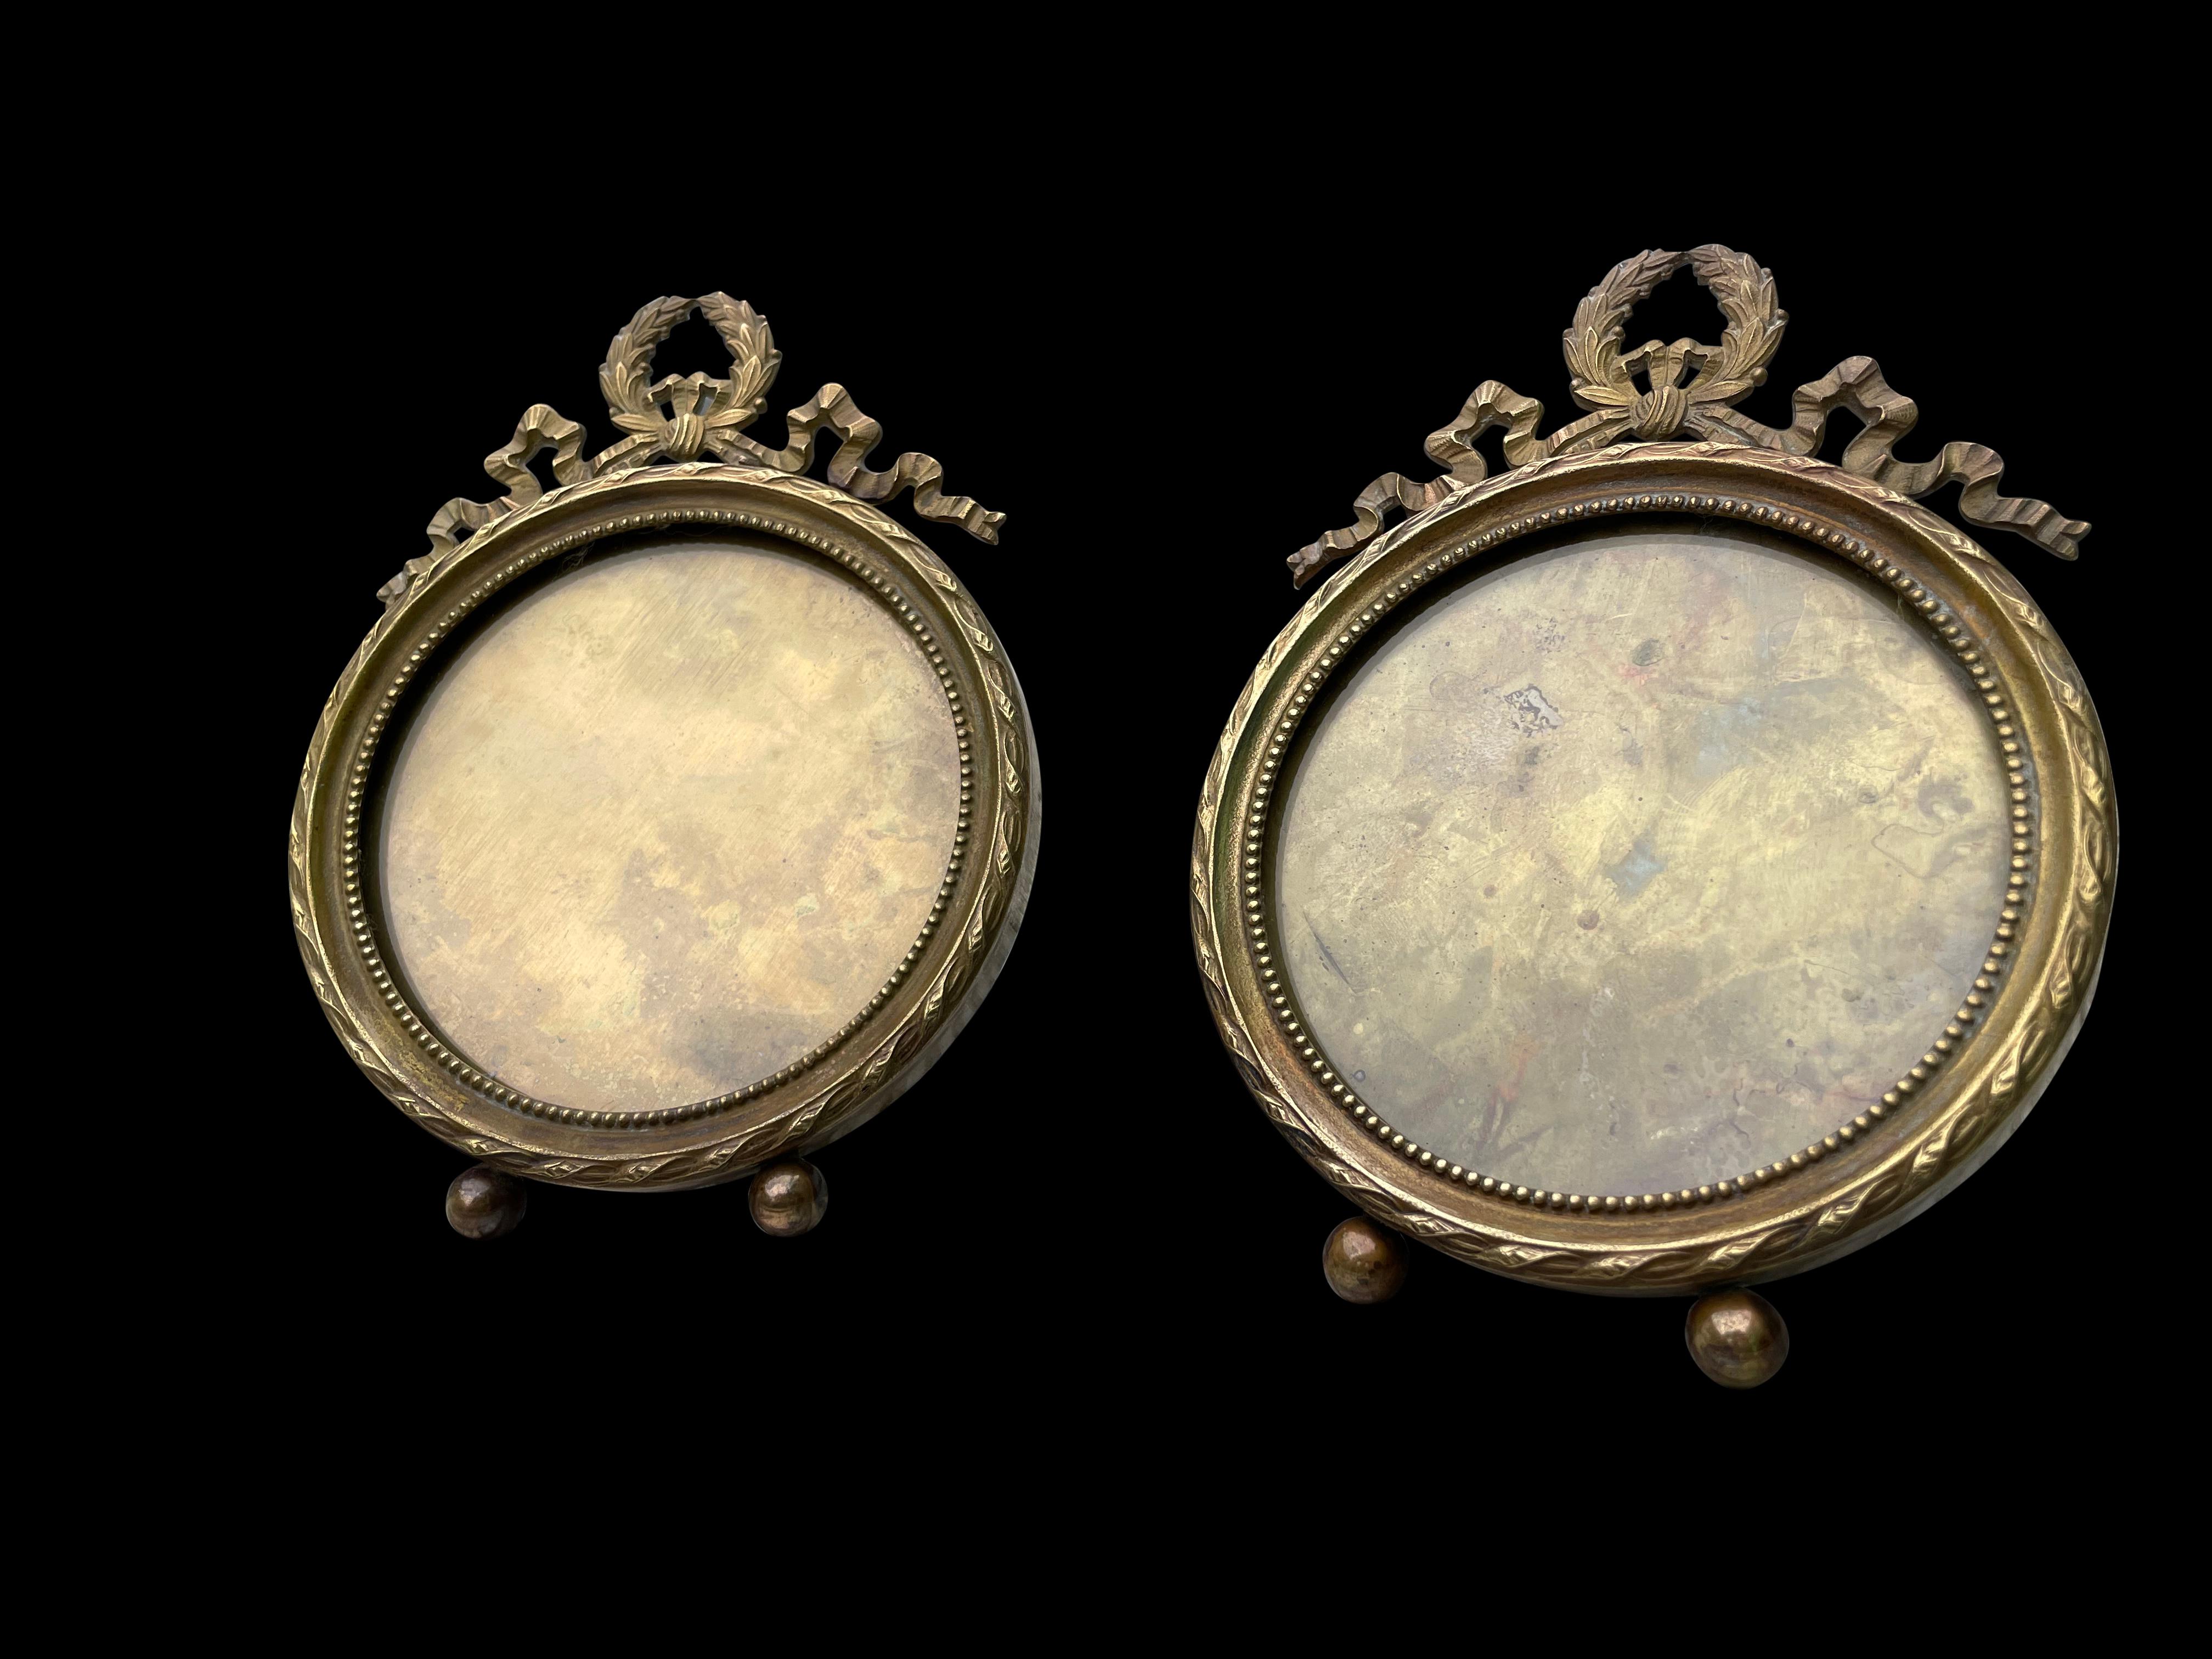 A fine pair of French solid brass Regency style photo-frames, 19th century. Decorated in bowes and swags, this set are a great addition to home decor.